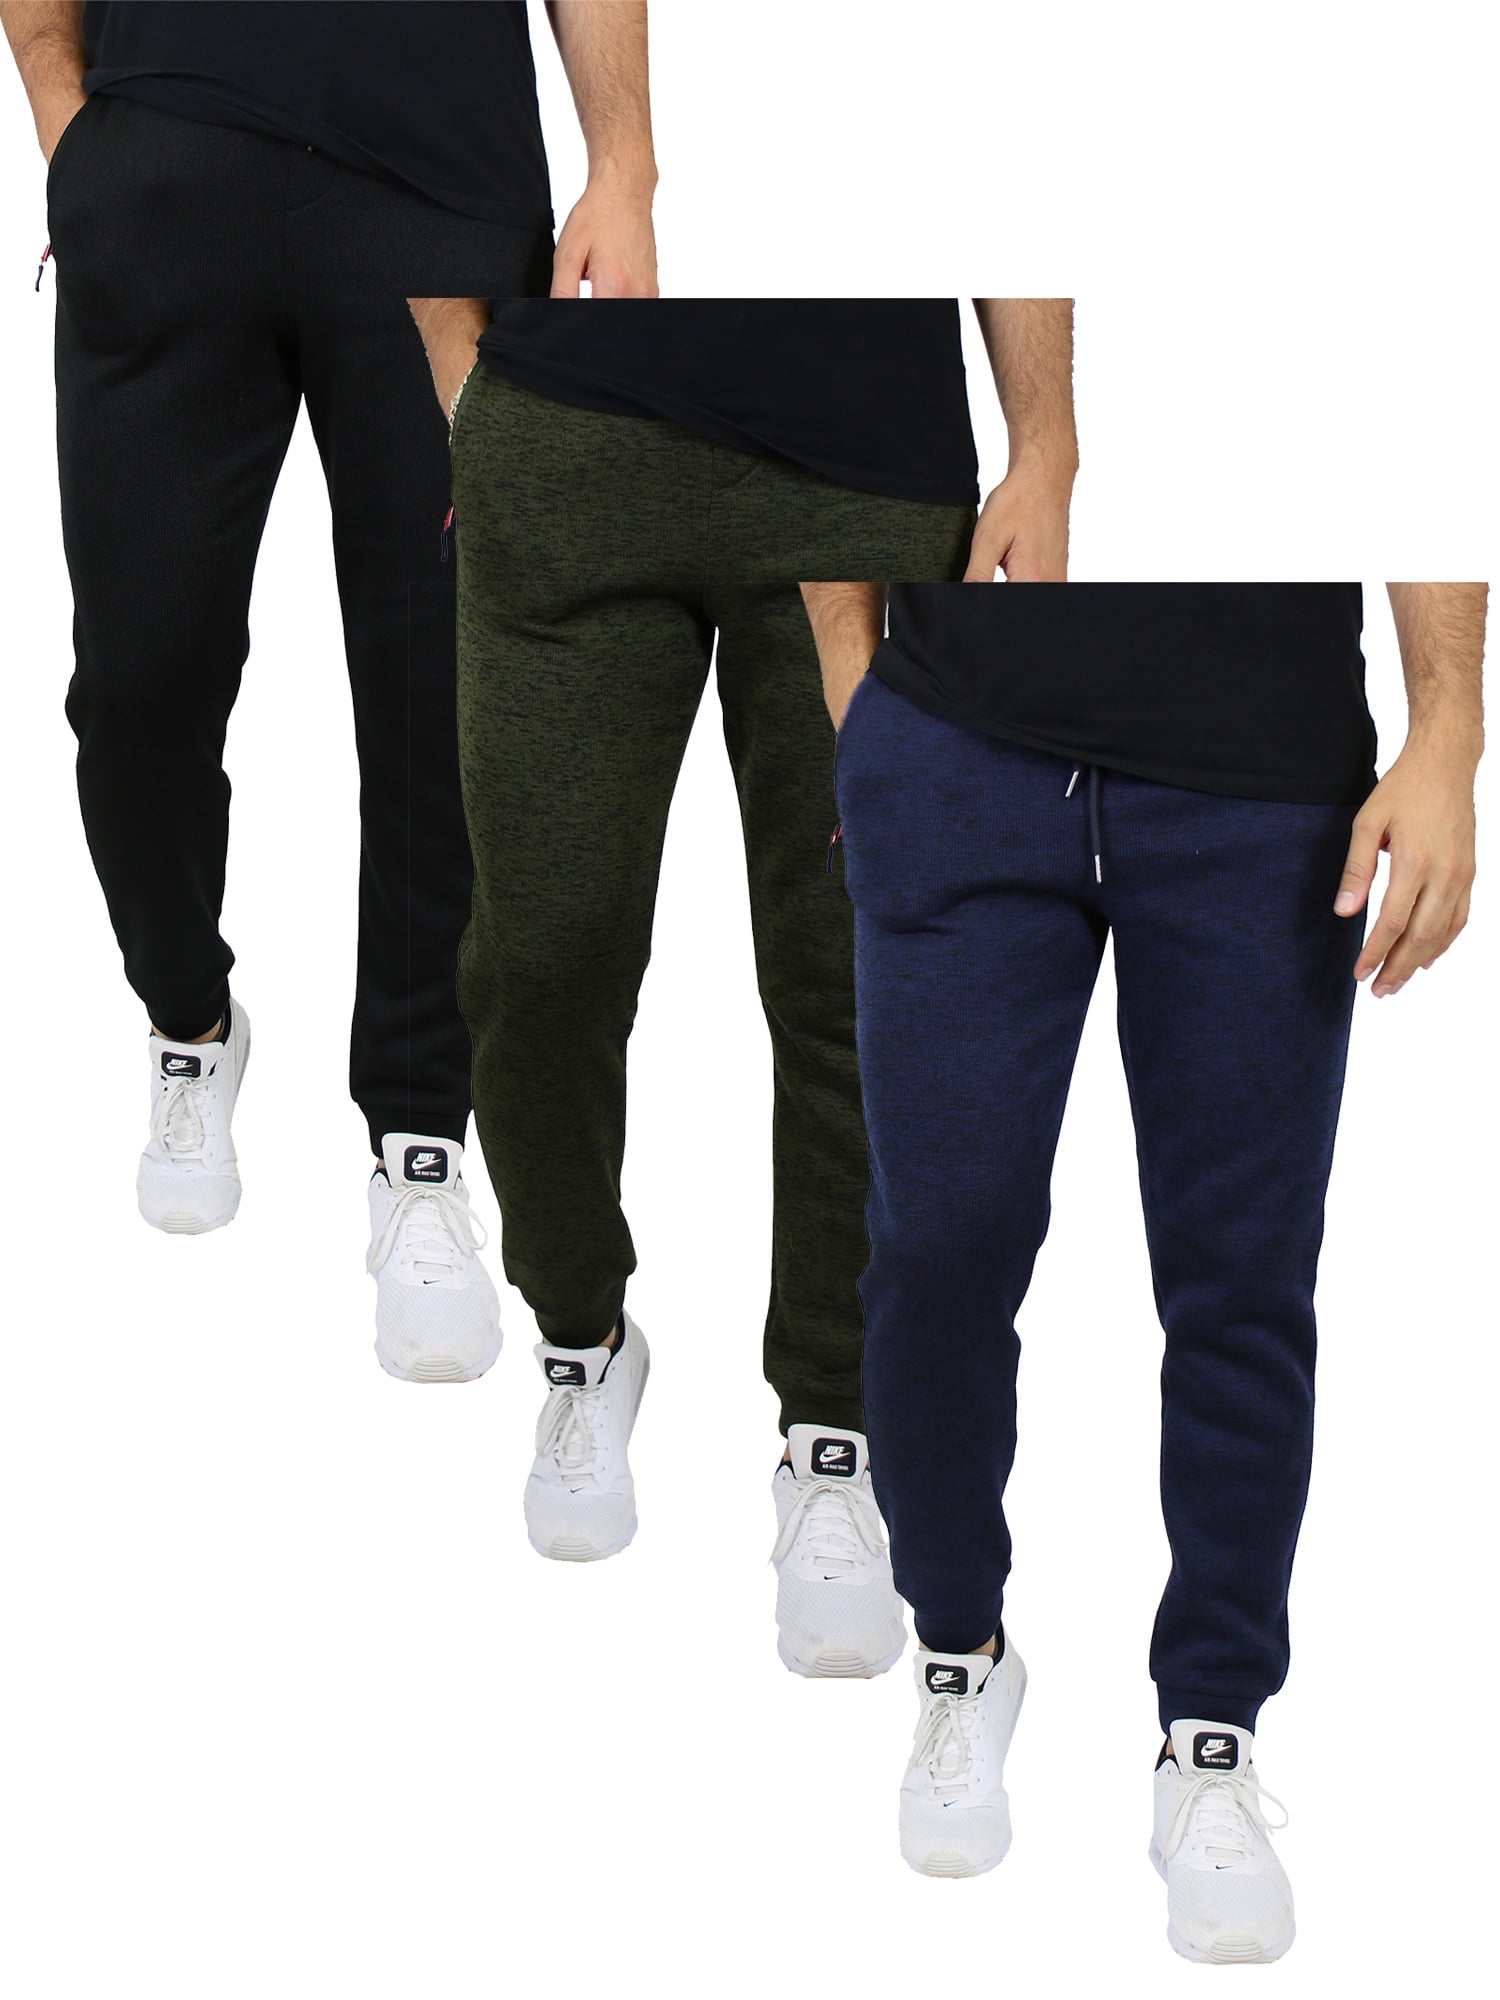 3-Pack Men's Fleece & French Terry Slim-Fit Jogger (Size, S-2XL)